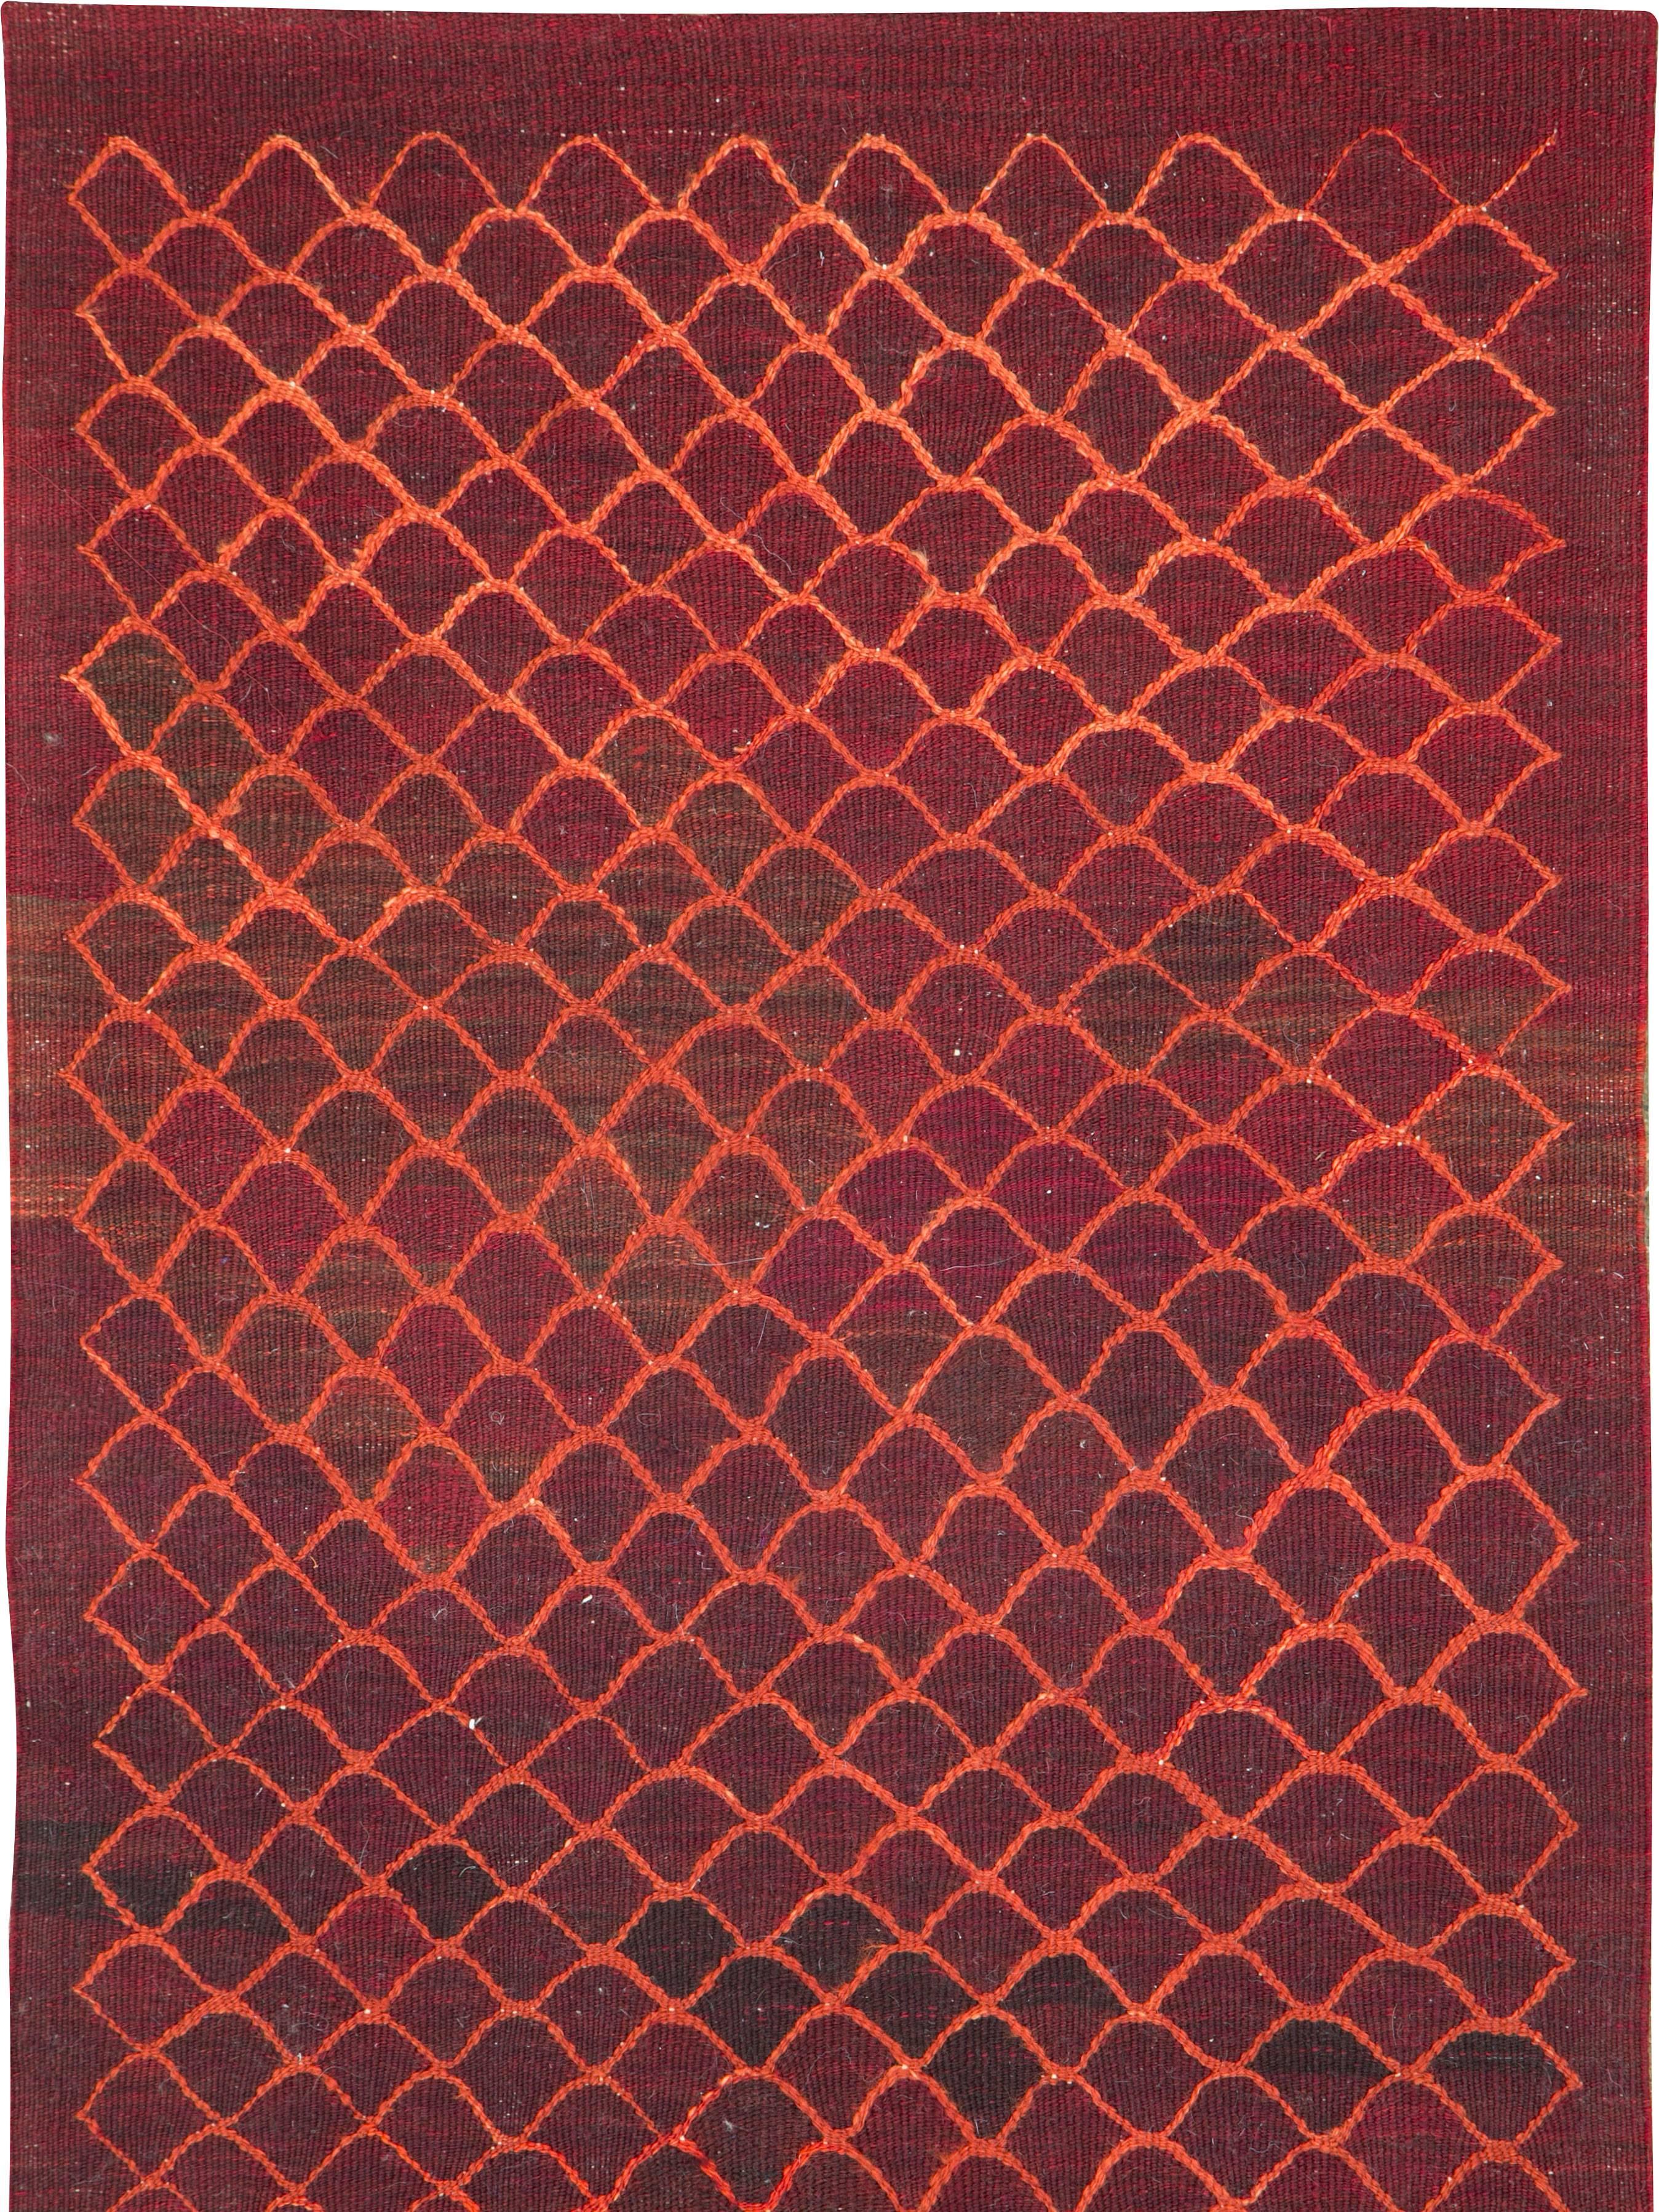 A modern Turkish flat-weave Kilim runner from the 21st century.